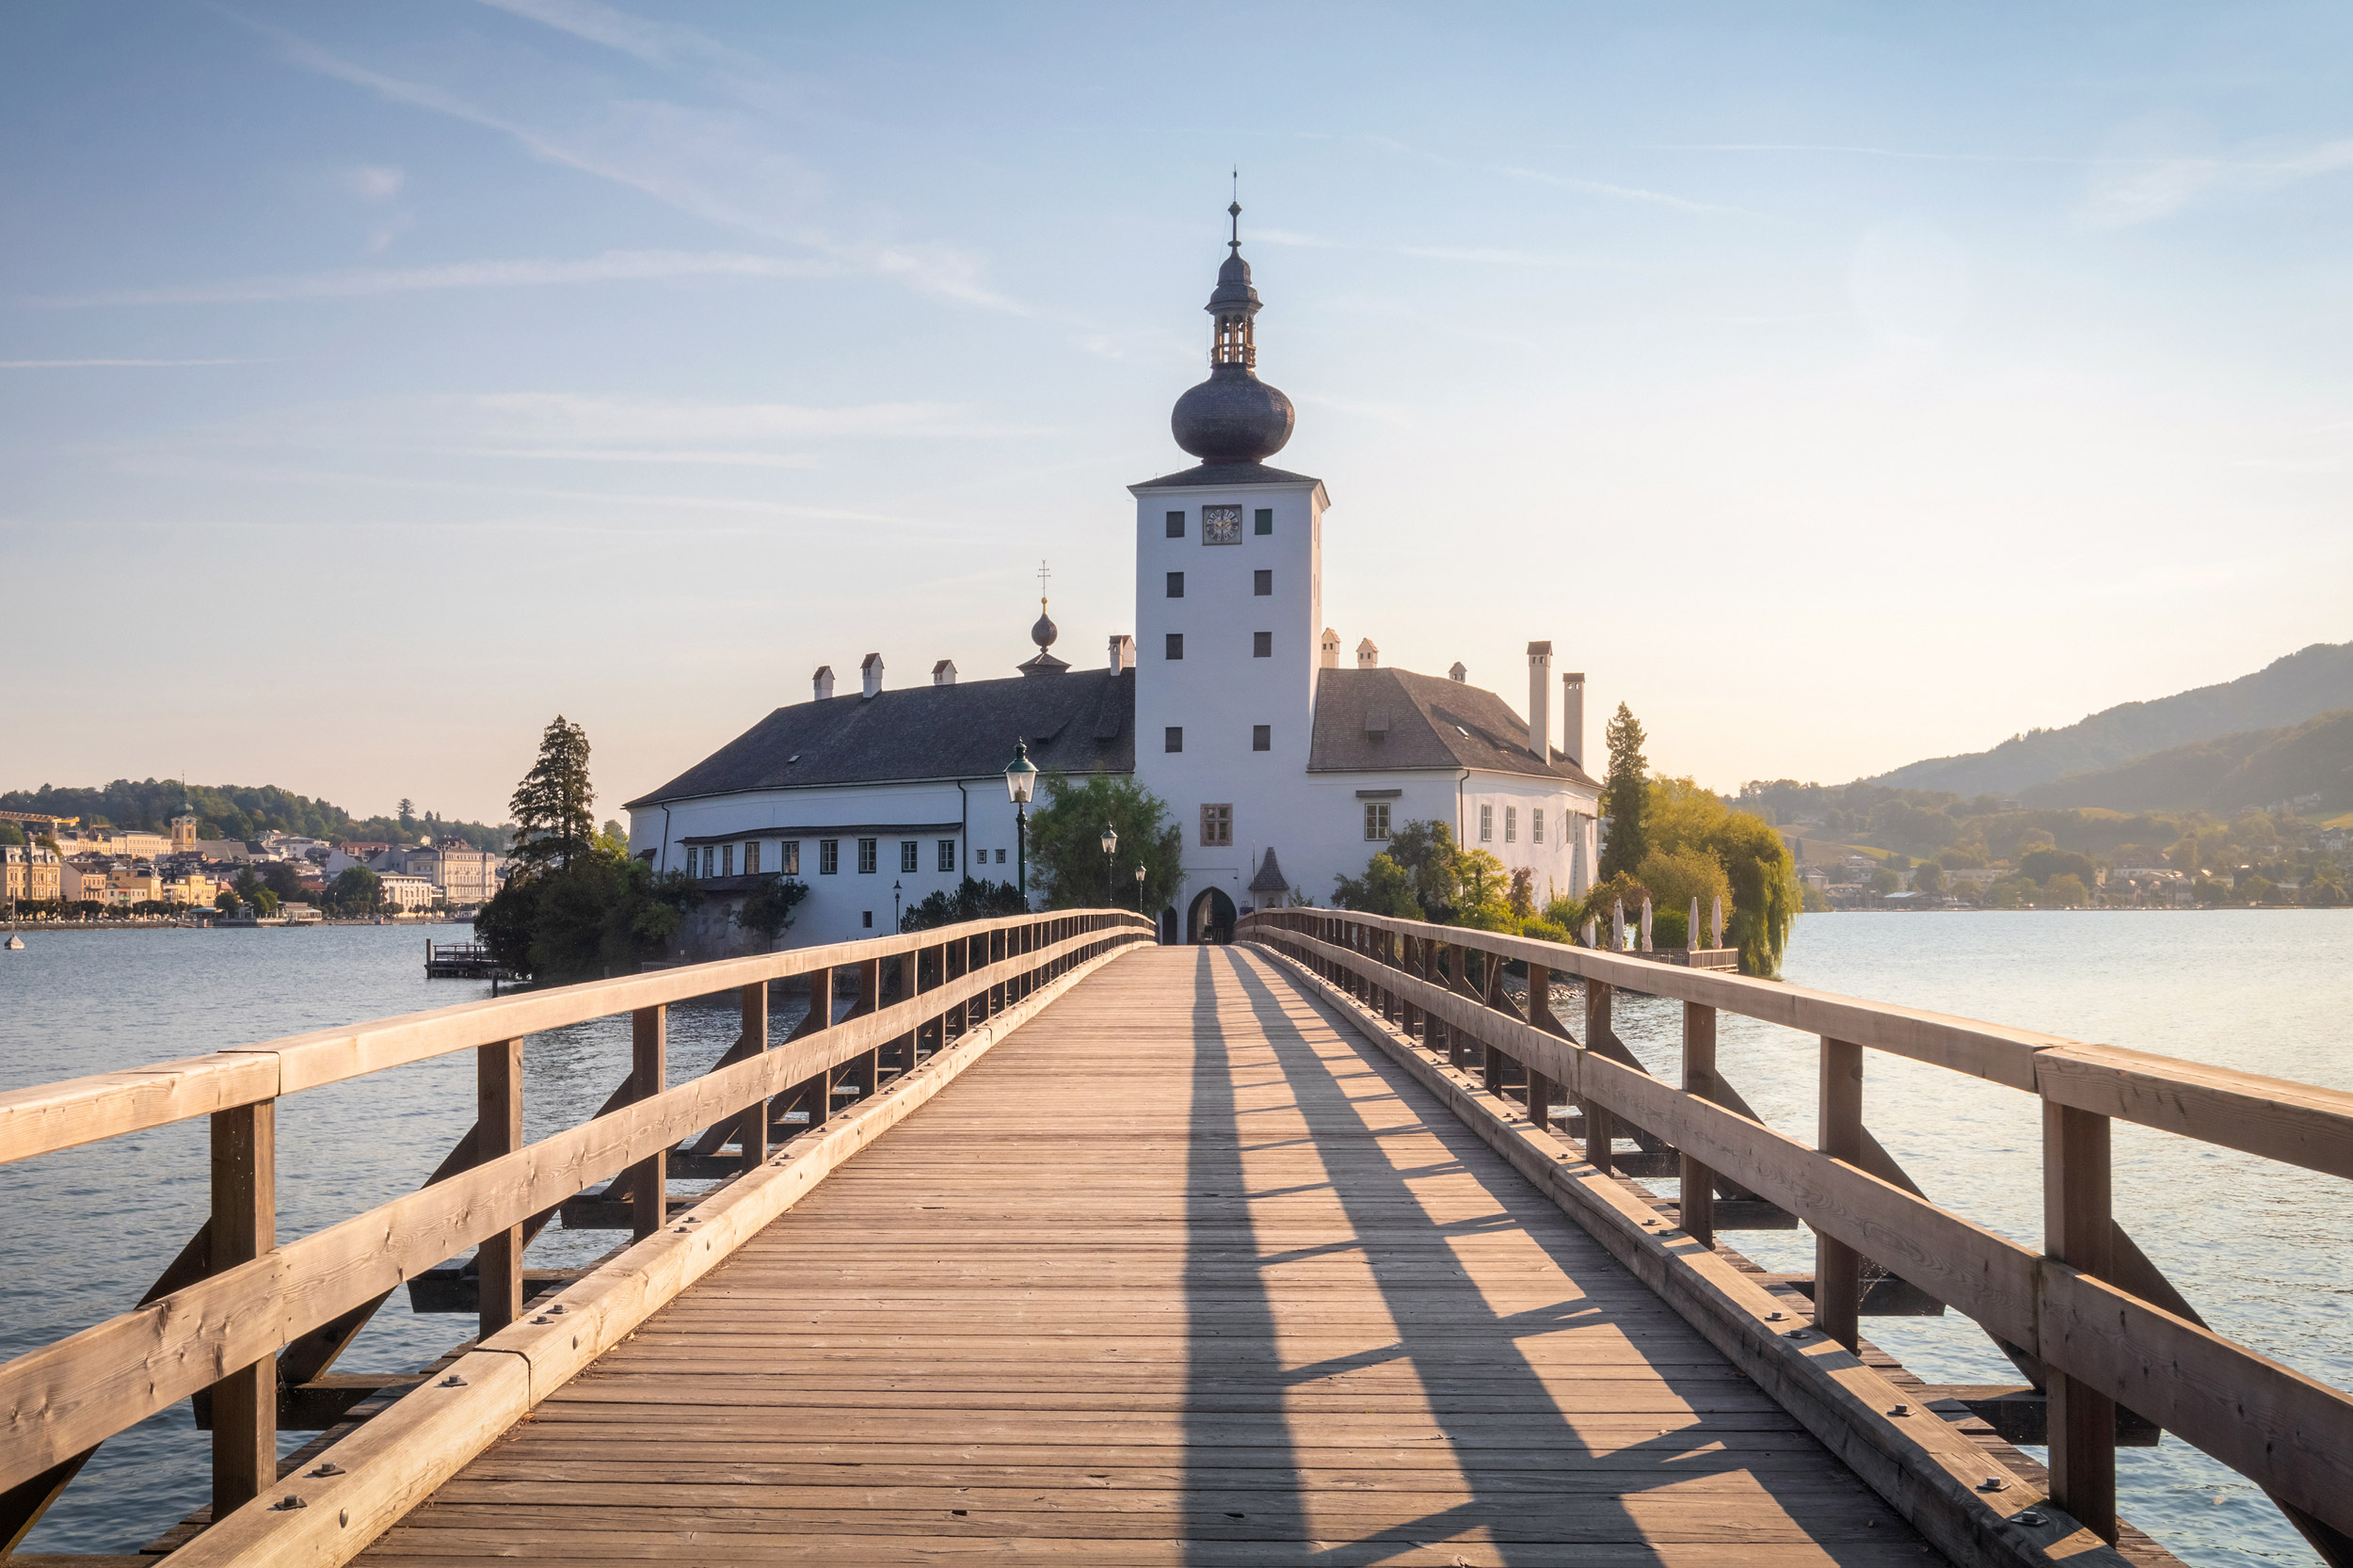 Wooden bridge to Traunsee castle at the morning, Gmunden